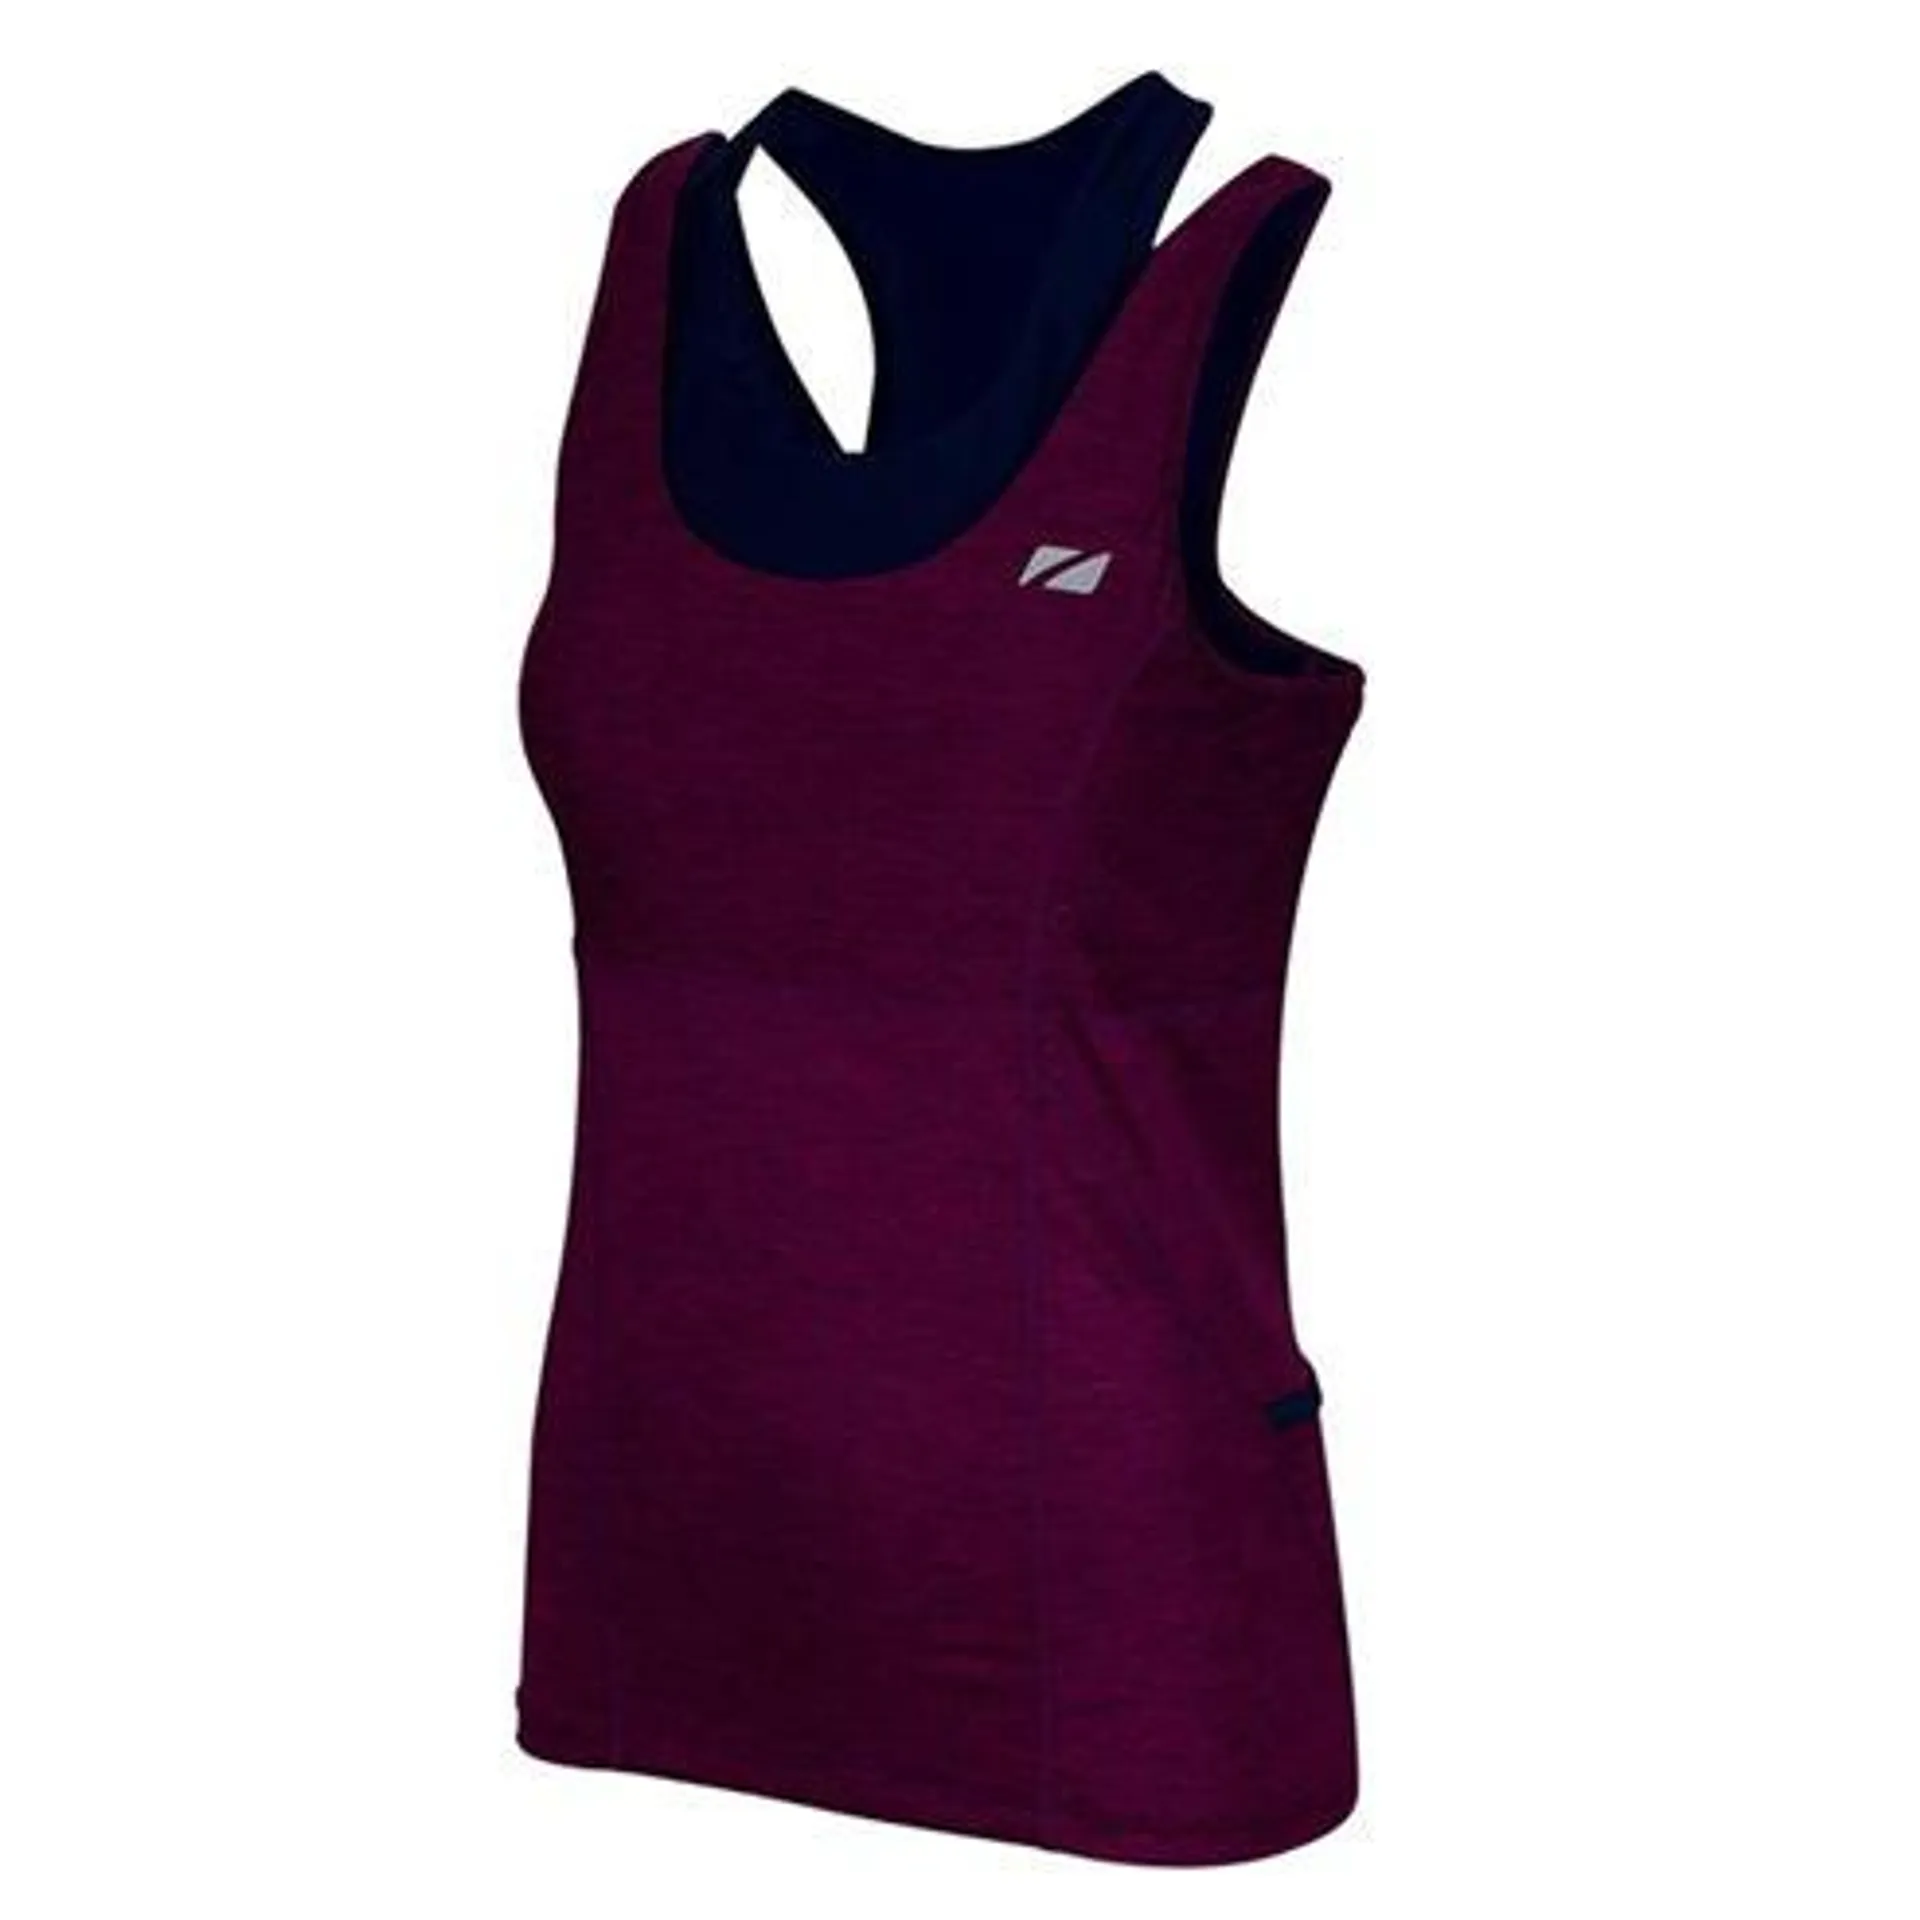 Women’s Performance Culture Support Tri Top